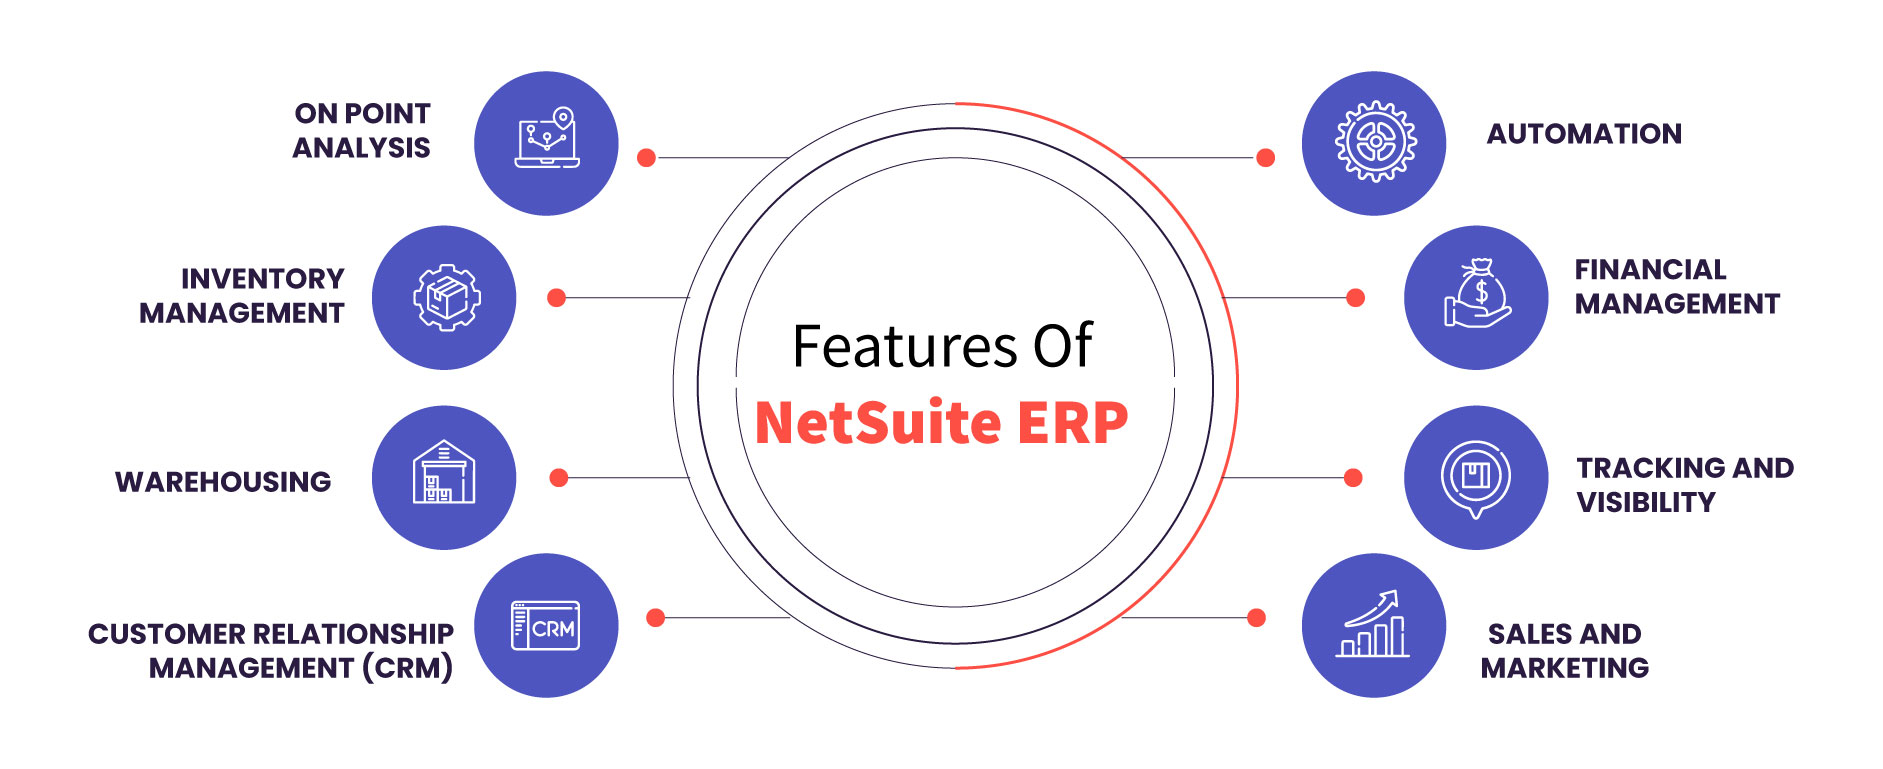 Features Of NetSuite